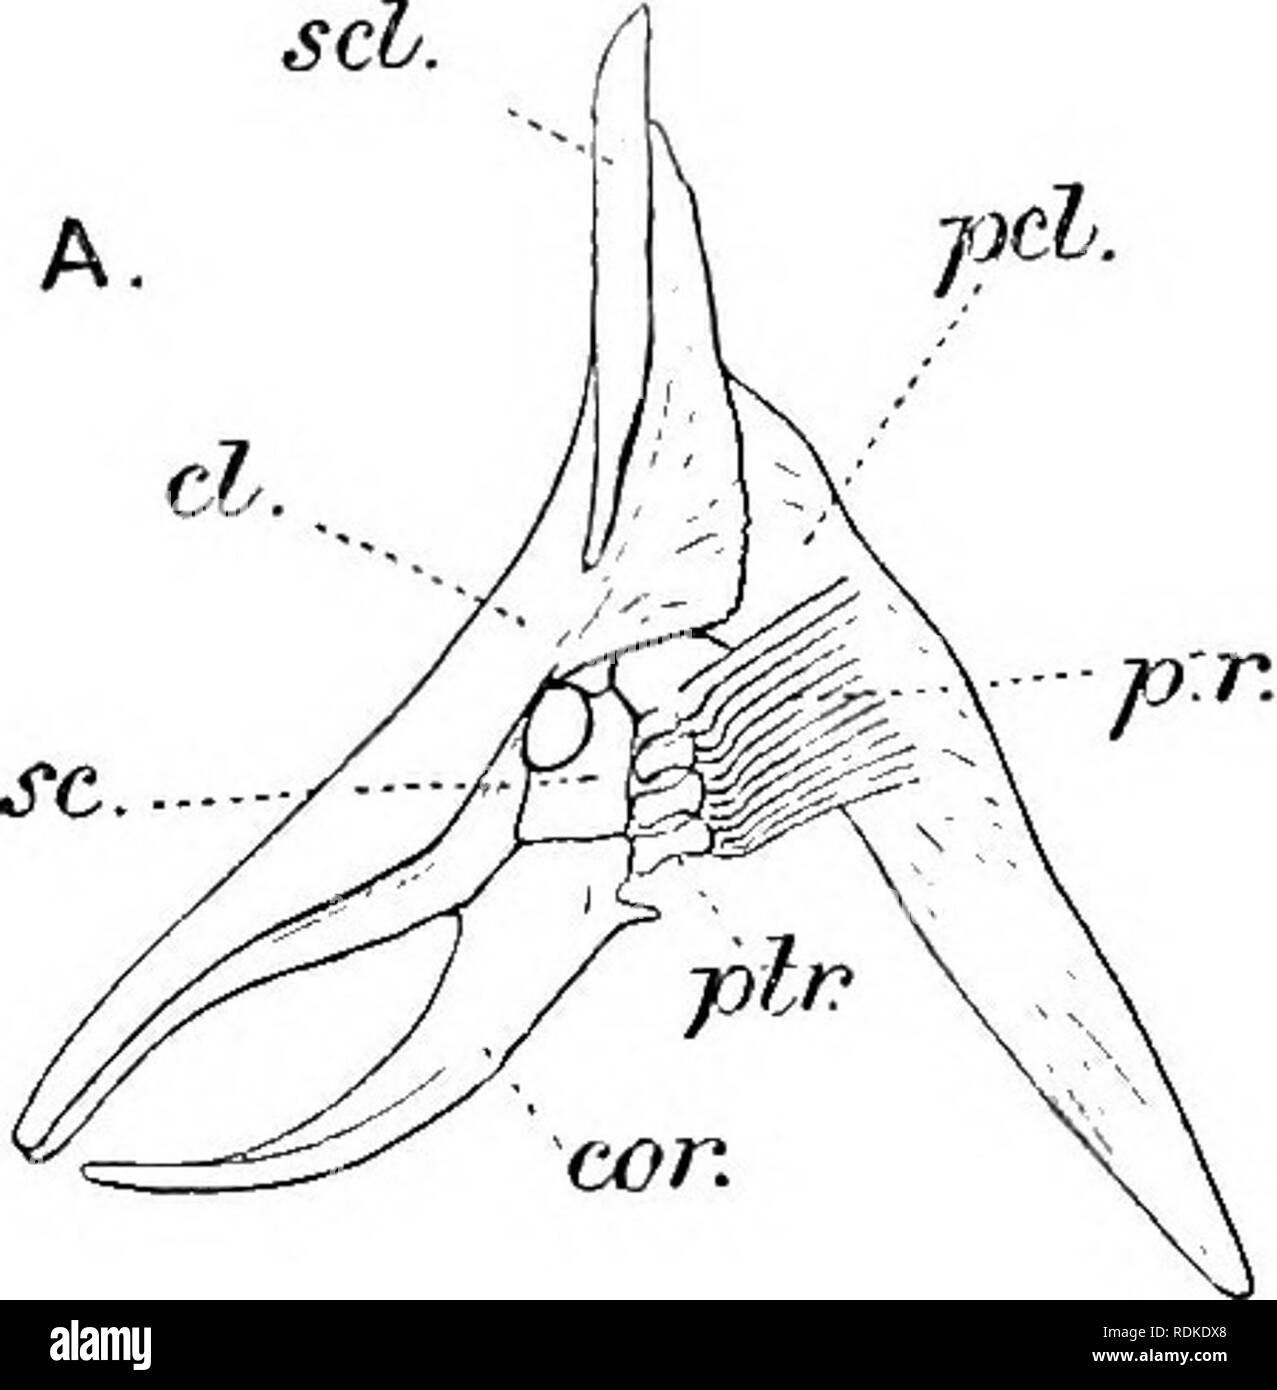 . The Cambridge natural history. Zoology. 72; TELEOSTEI II. Gymnodontes.—Supraclavicle oblique or nearly horizontal; lower three jjterygials enlarged and immovably united to the coraco-scapular cartilage; anterior vertebrae with bifid divergent neural spines; pelvis absent. Beak with a median suture ; interoperculum not connected with suboper- culum ; caudal fin present ; body inflatable . 1. Tetrodontidae. Beak without median suture ; interoperculum attached posteriorly to sub- operculum ; caudal fin 23resent; body inflatable. 2. Diodontidae. Beak without median suture ; interoperculum attach Stock Photo